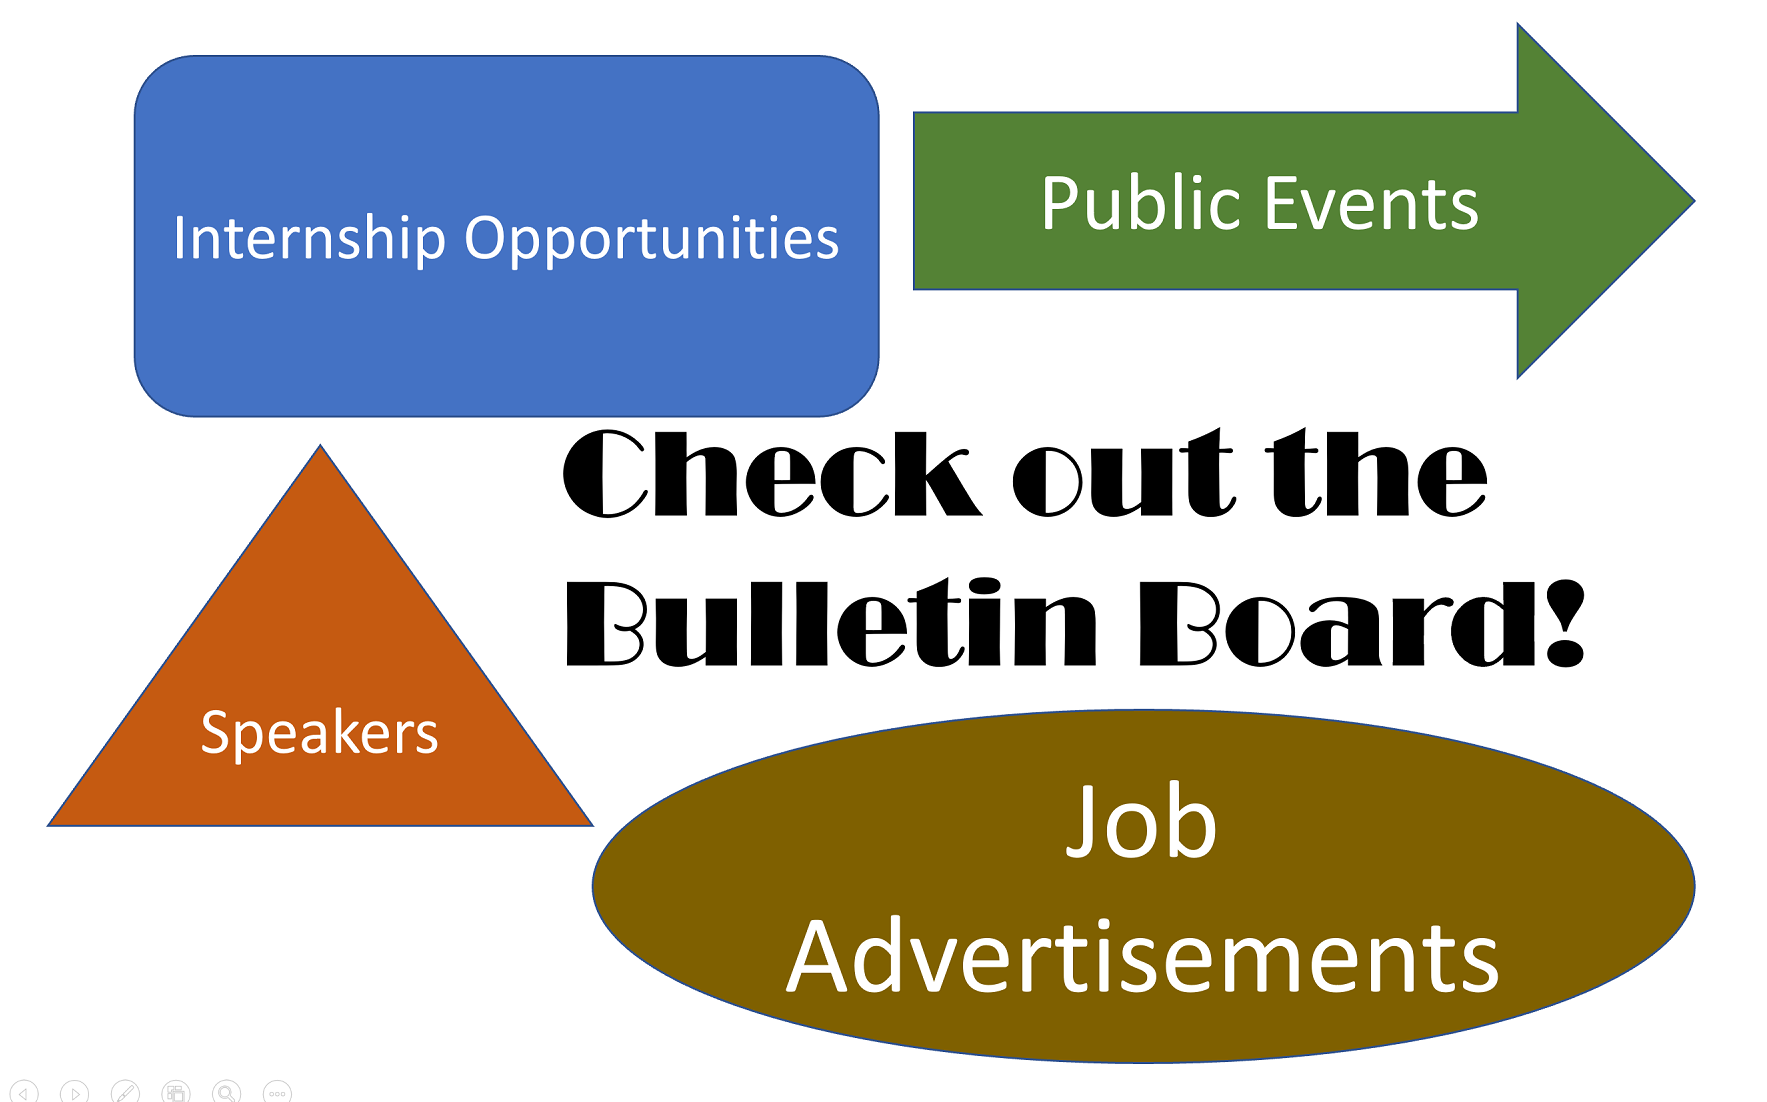 Bulletin board has job ads, internship opportunities, speaker and public events announcements